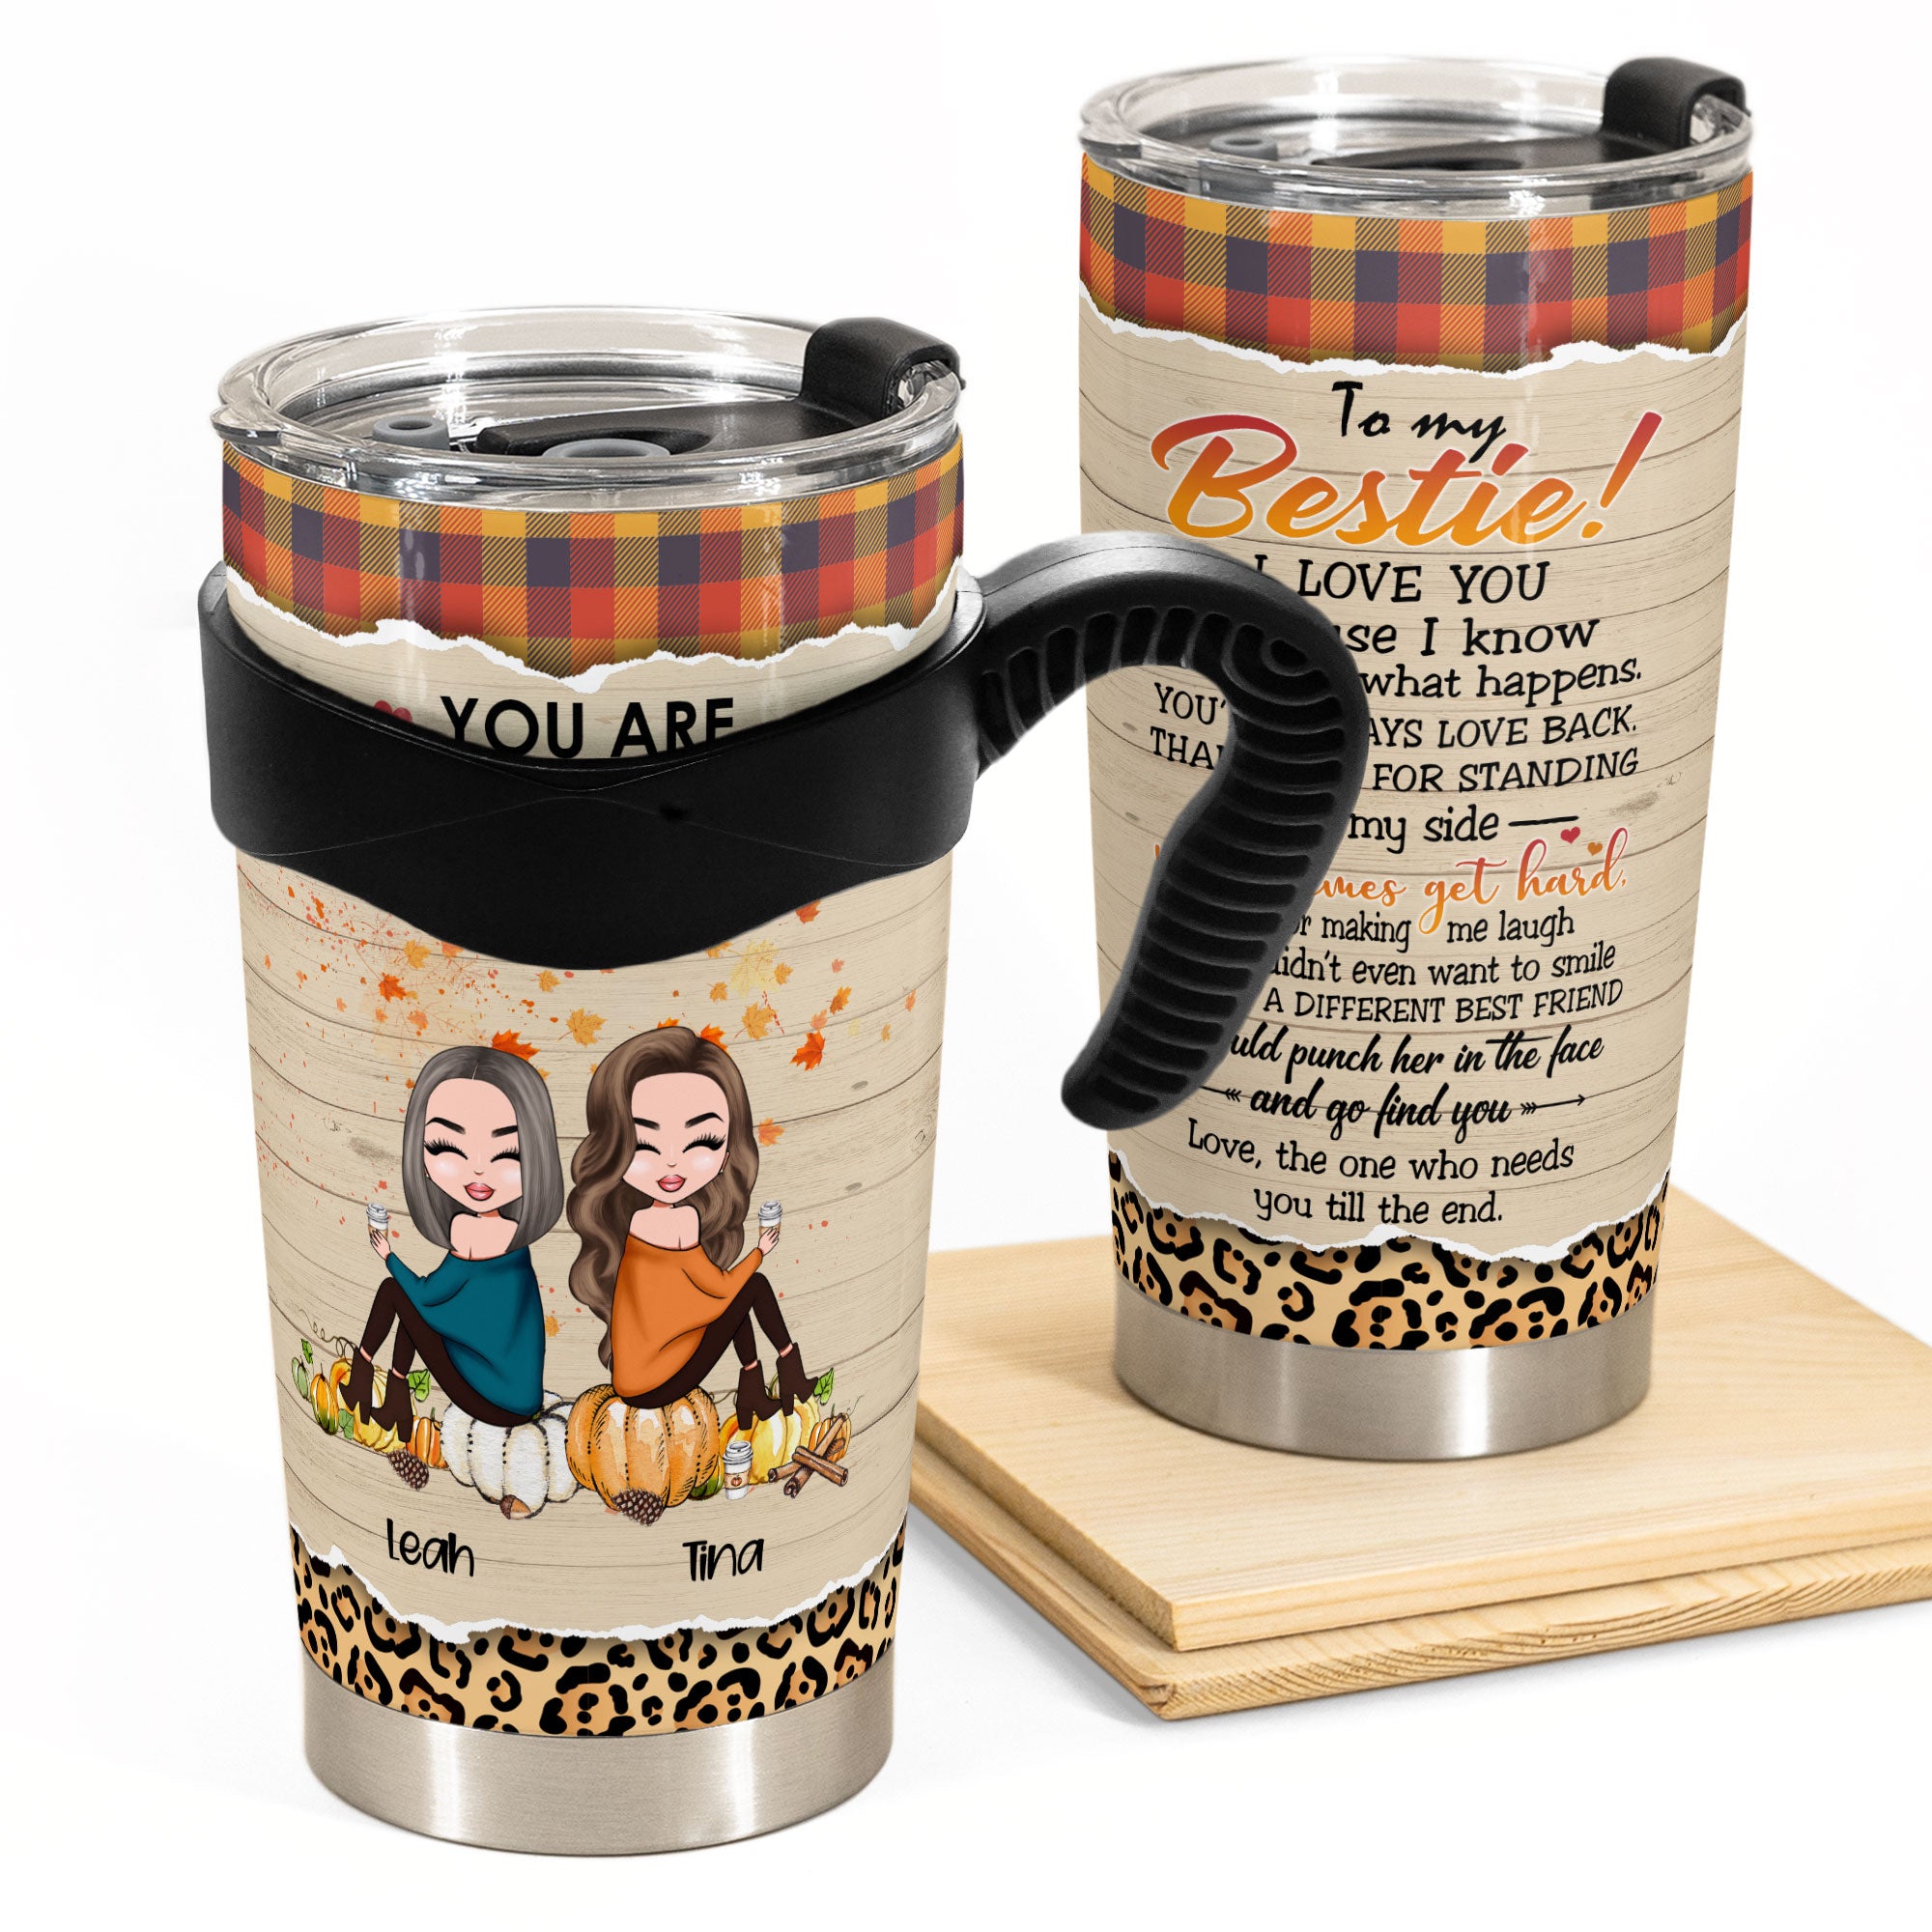 You Are My Person - Personalized Tumbler Cup - Fall Season Gift For Besties - Cartoon Autumn Friends